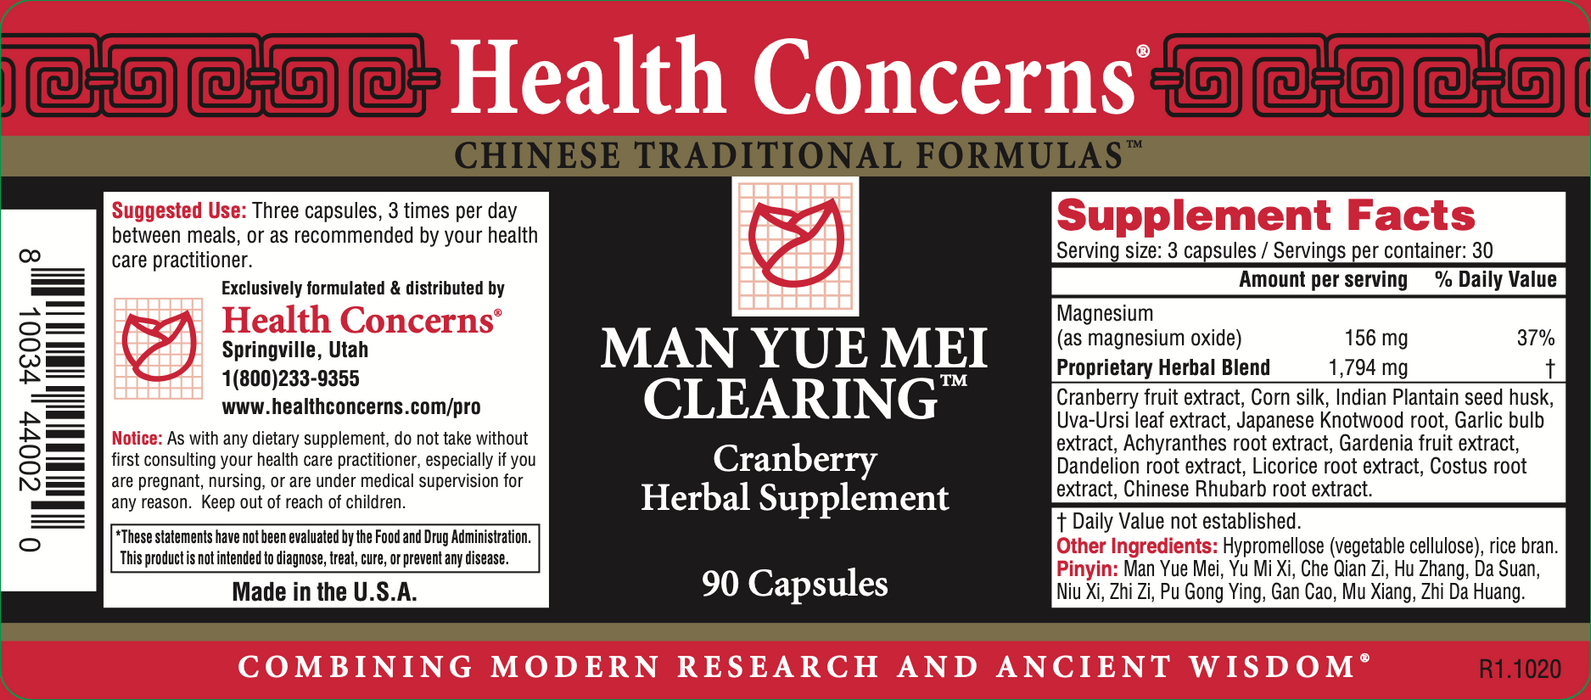 Health Concerns - Man Yue Mei Clearing (90 Capsules) - 